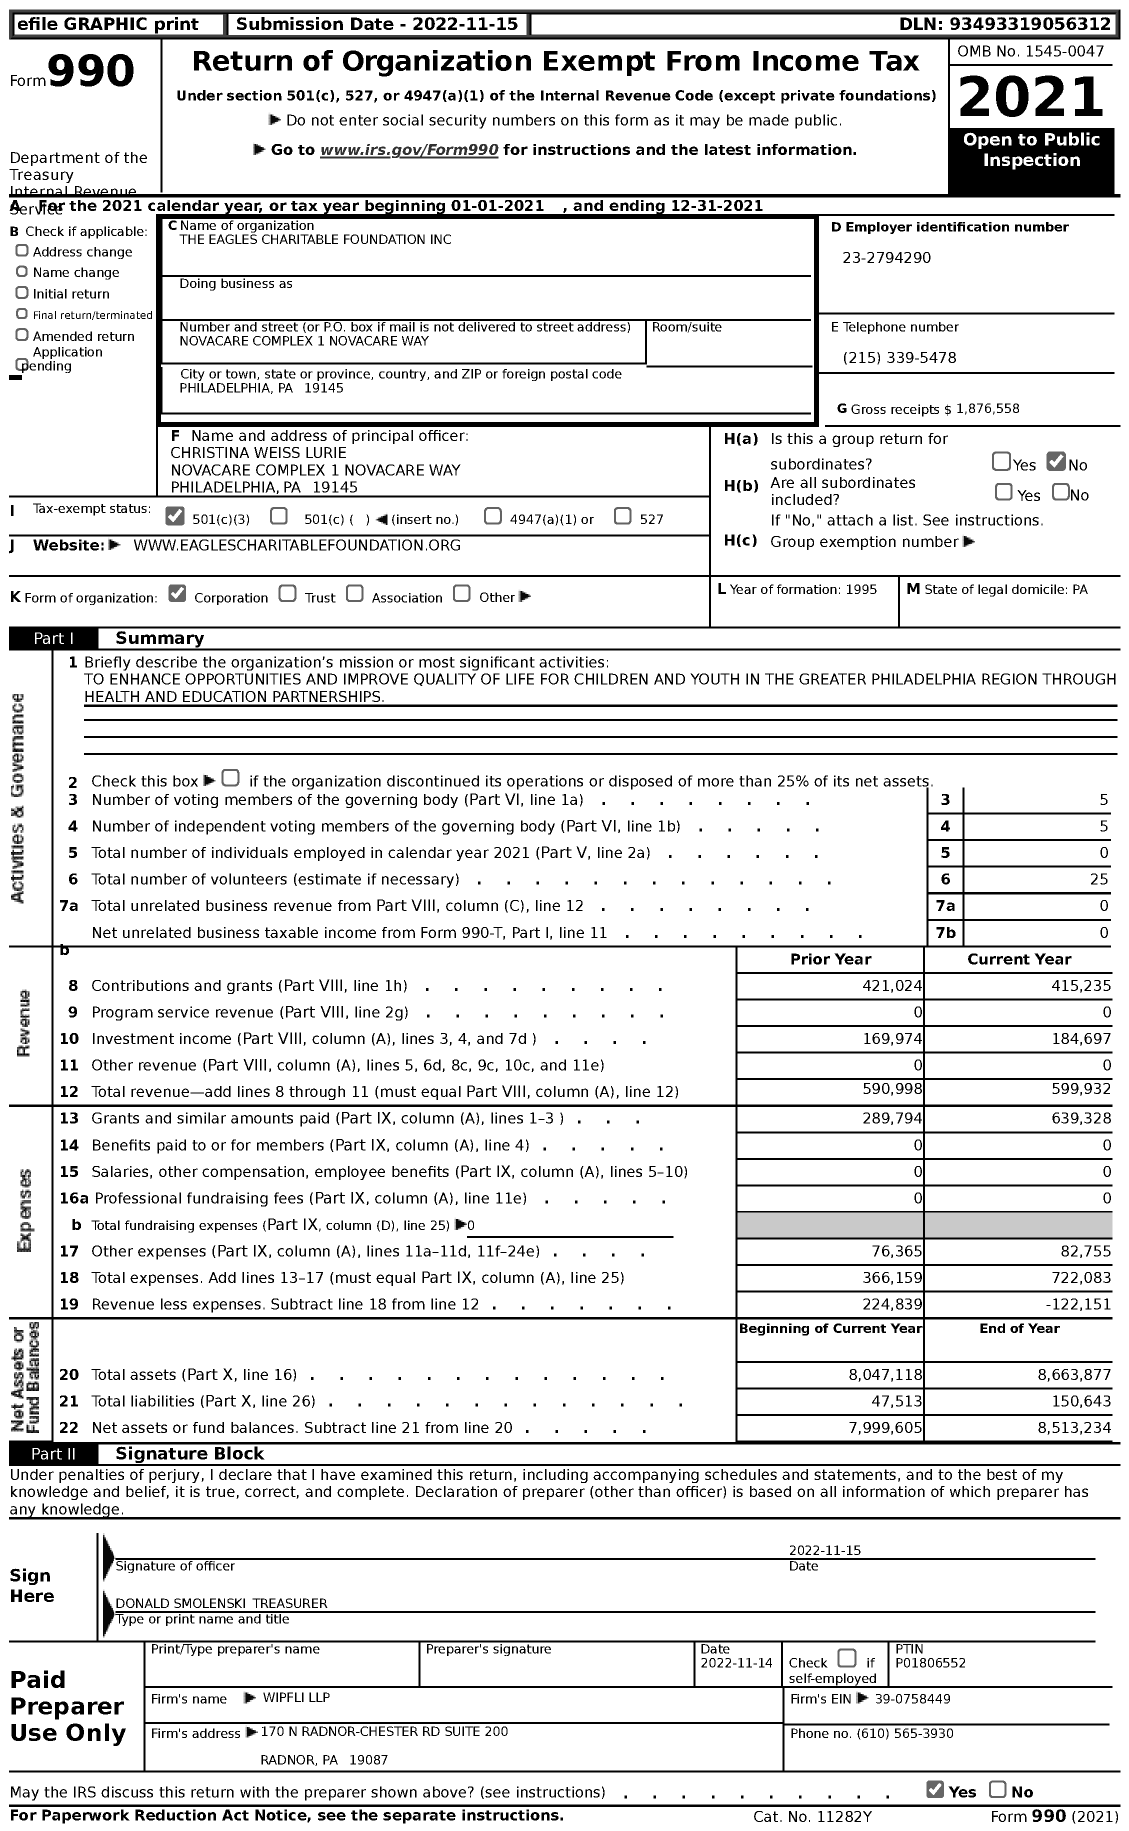 Image of first page of 2021 Form 990 for Eagles Charitable Foundation (ECF)